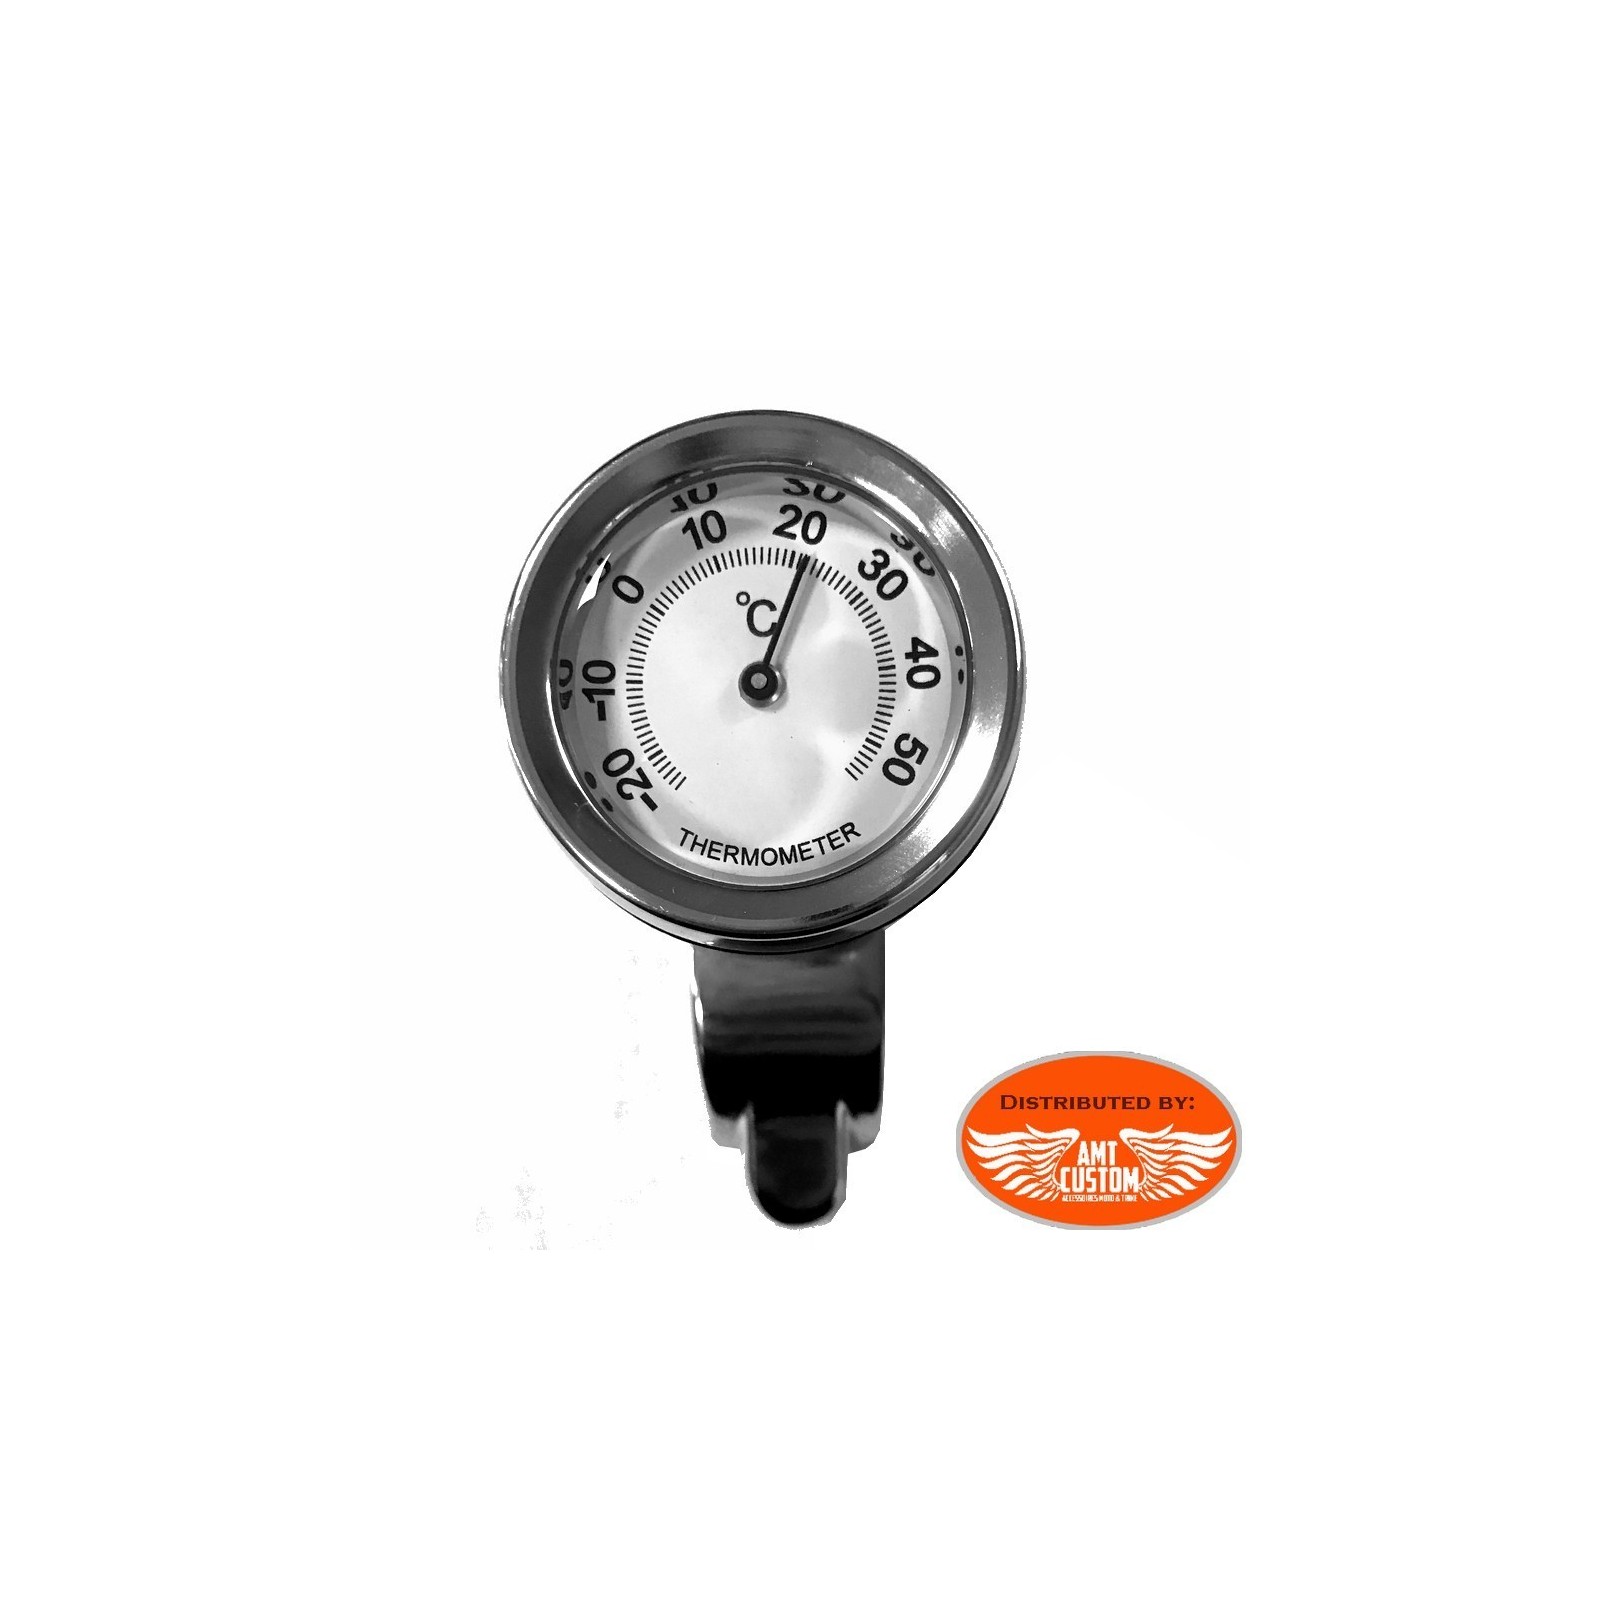 Compatible with 22-25.4mm handlebar motorcycle bicycle ATV car clock  thermometer thermometer universal 2pcs